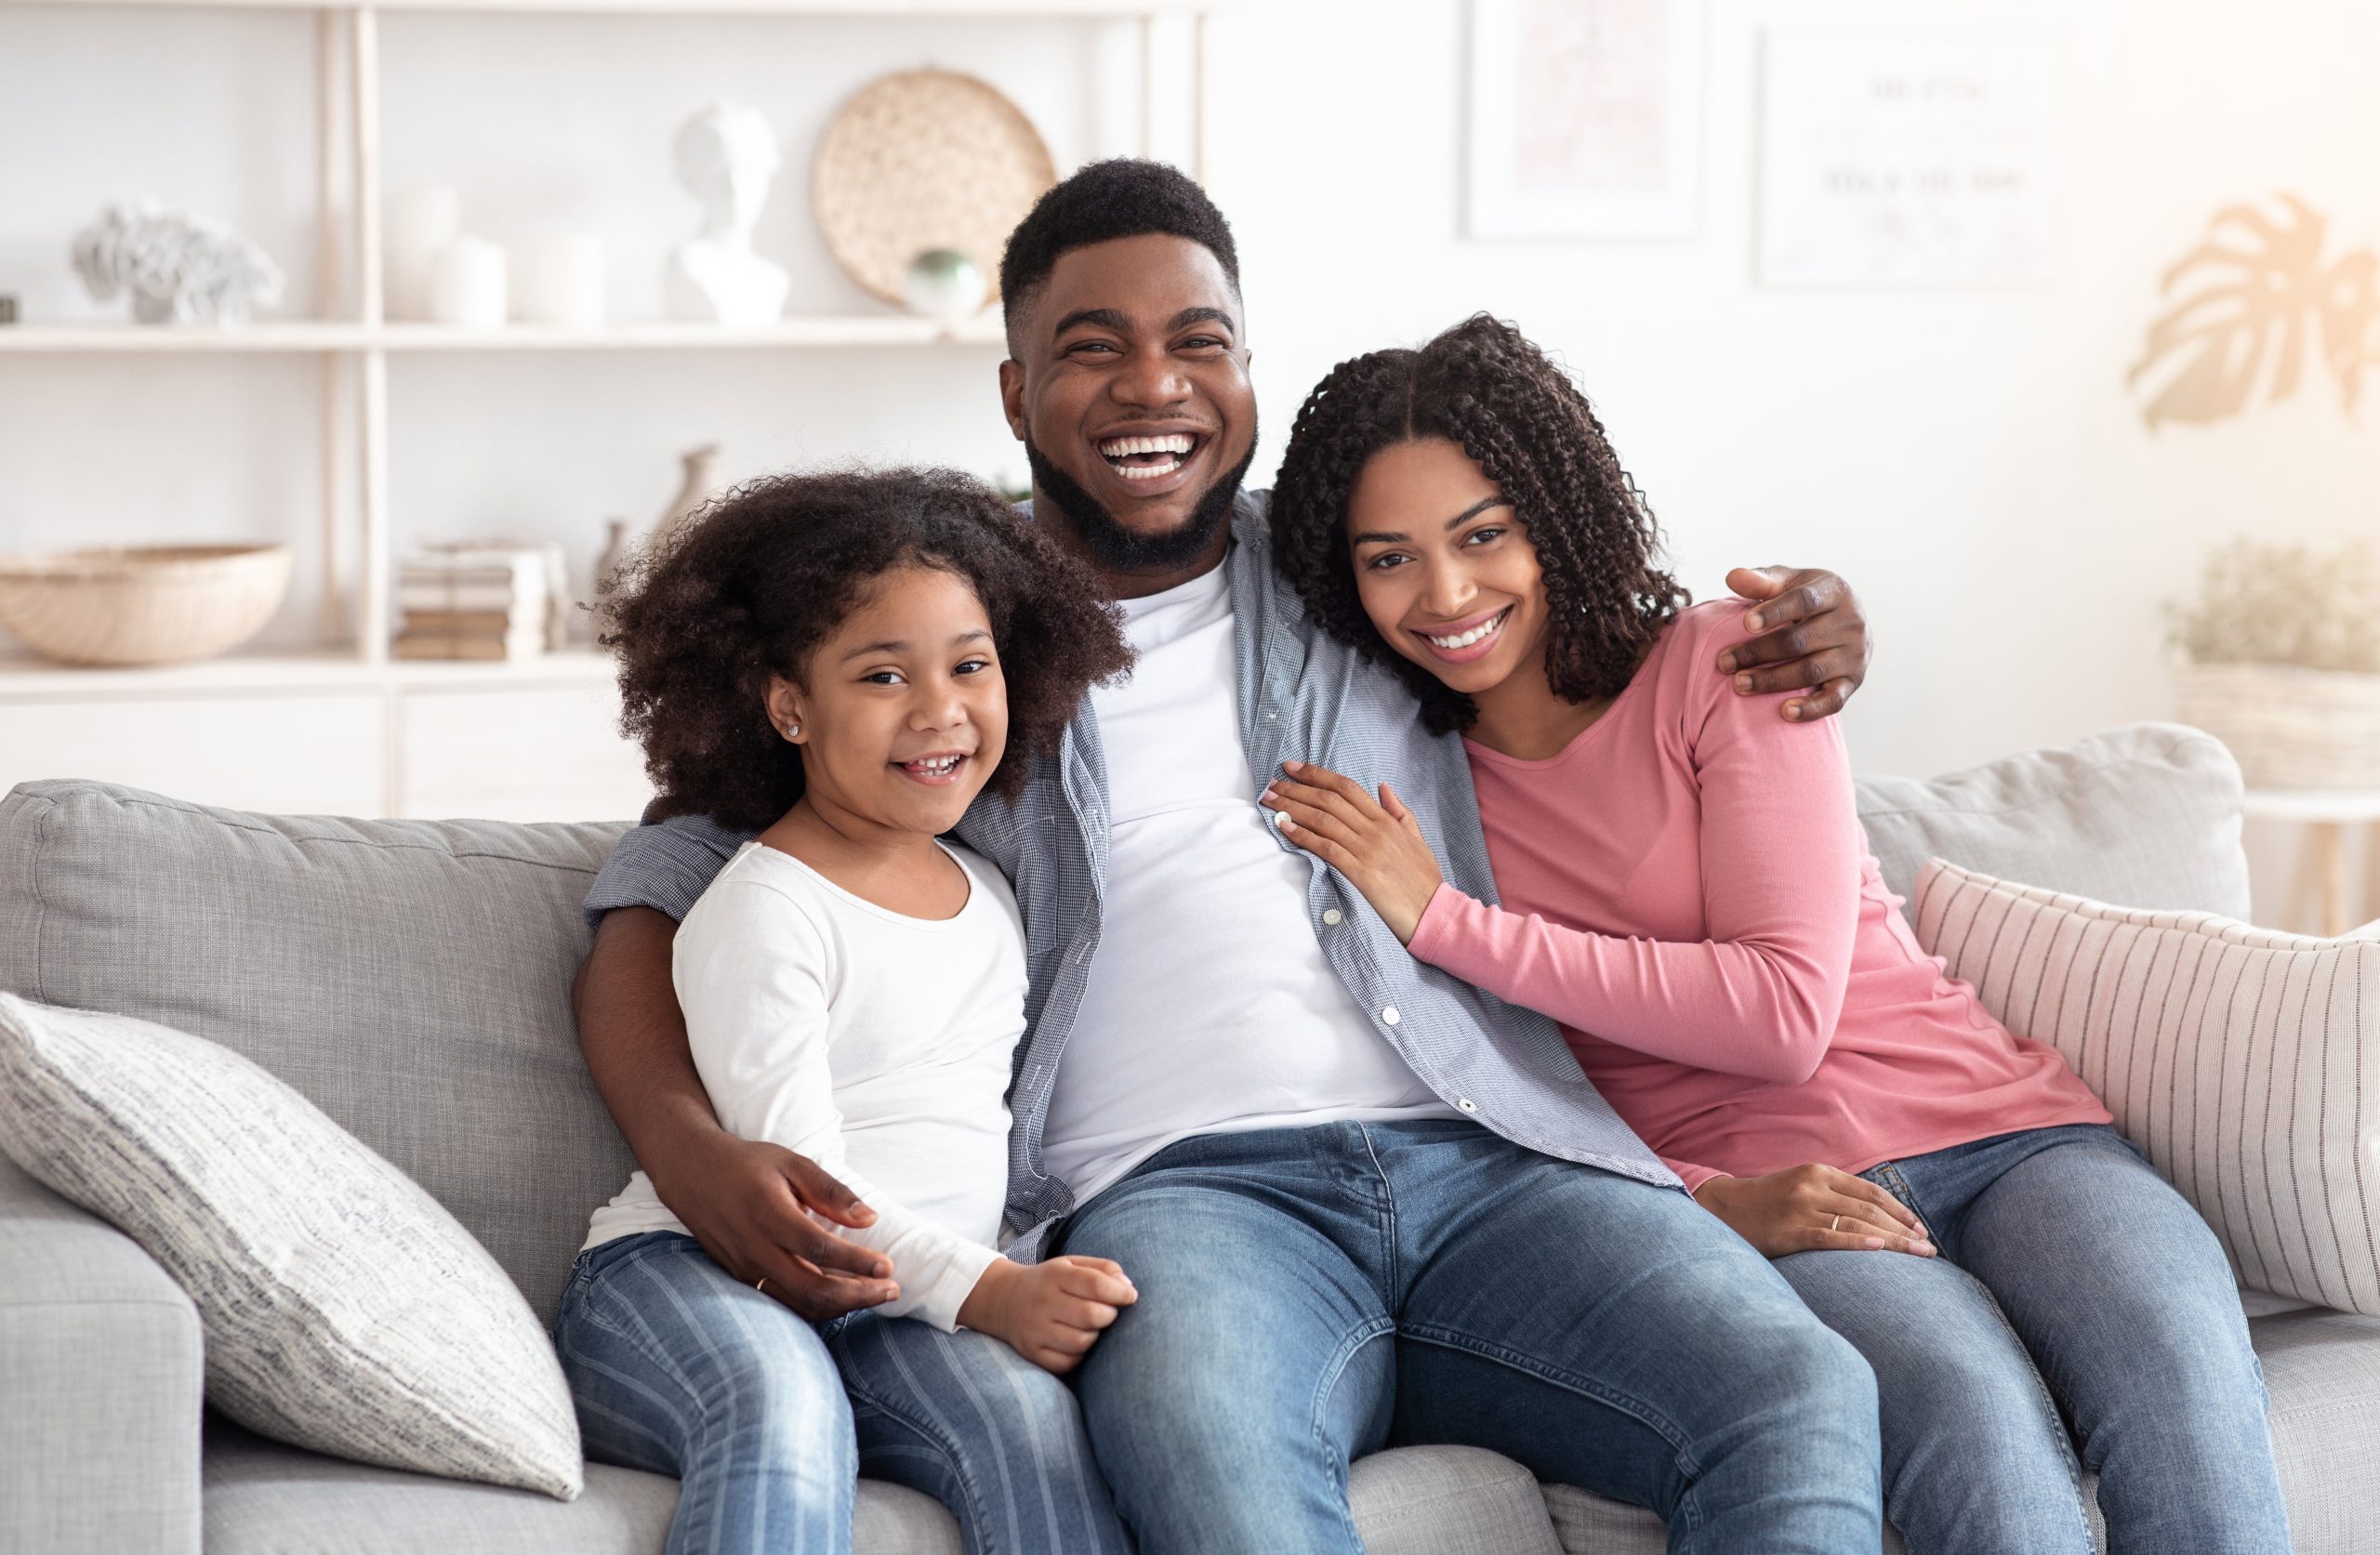 Family lifestyle portrait of happy black mom, dad with their little daughter at home, hugging on couch in living room and looking at camera